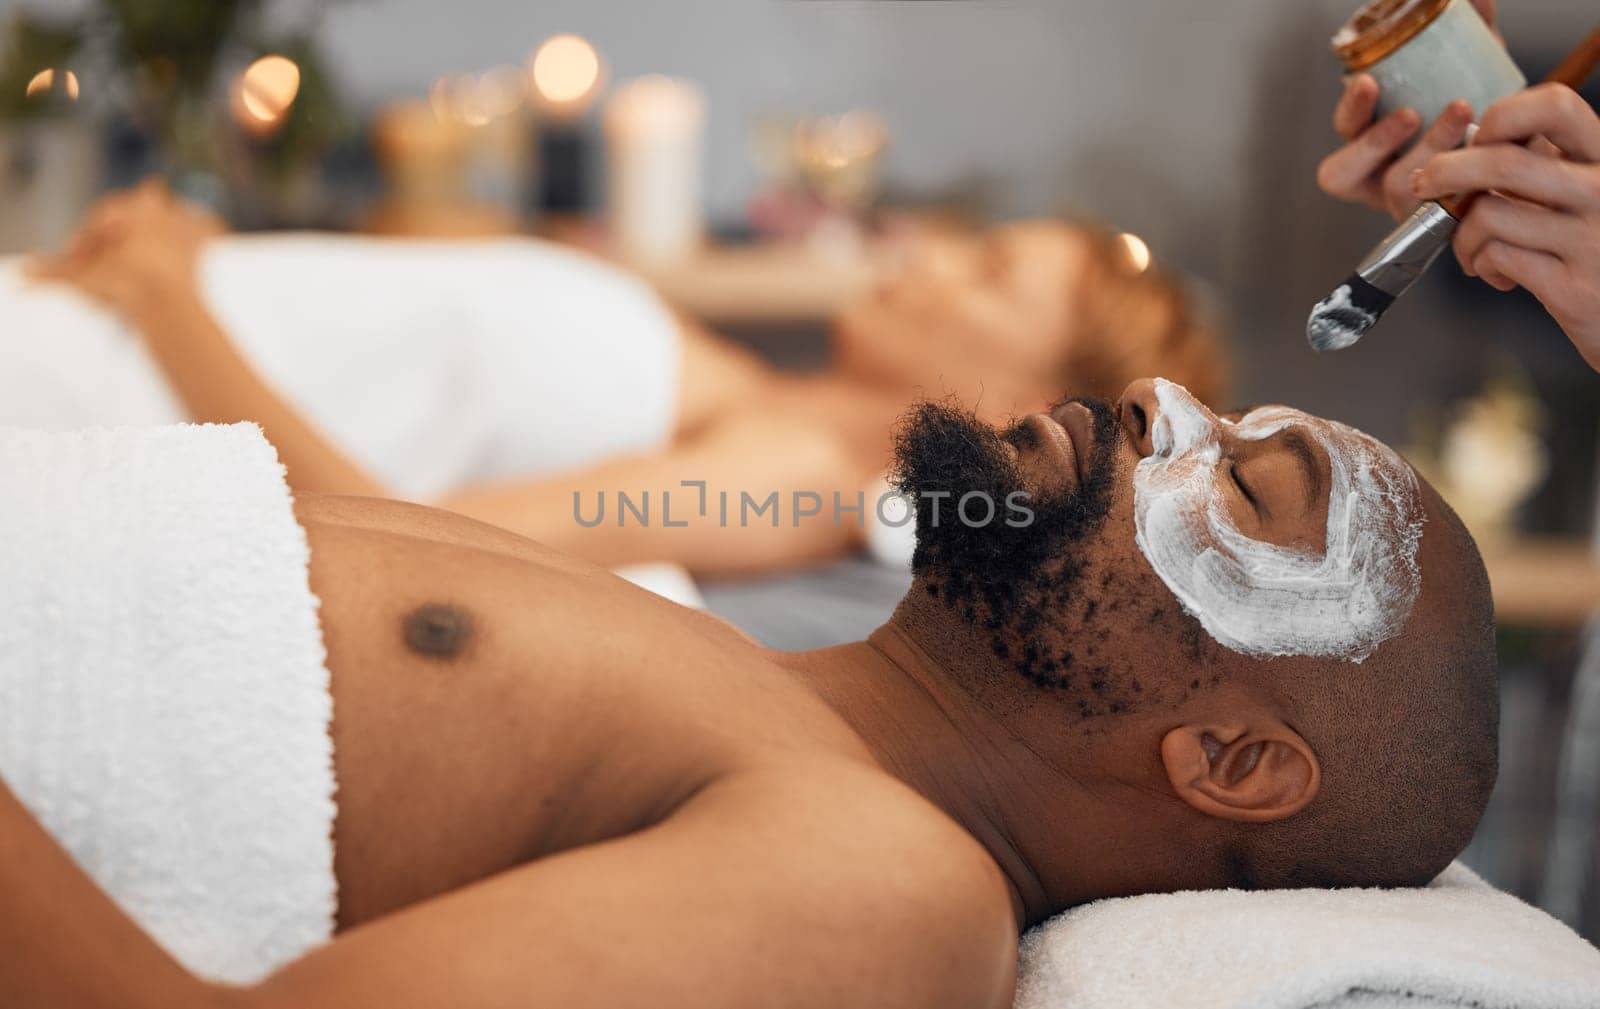 Skincare, wellness and black man getting a facial at a spa for relaxation, calm and satisfaction. Beauty, luxury treatment and couple massage at beauty salon together, skincare products on mans face.